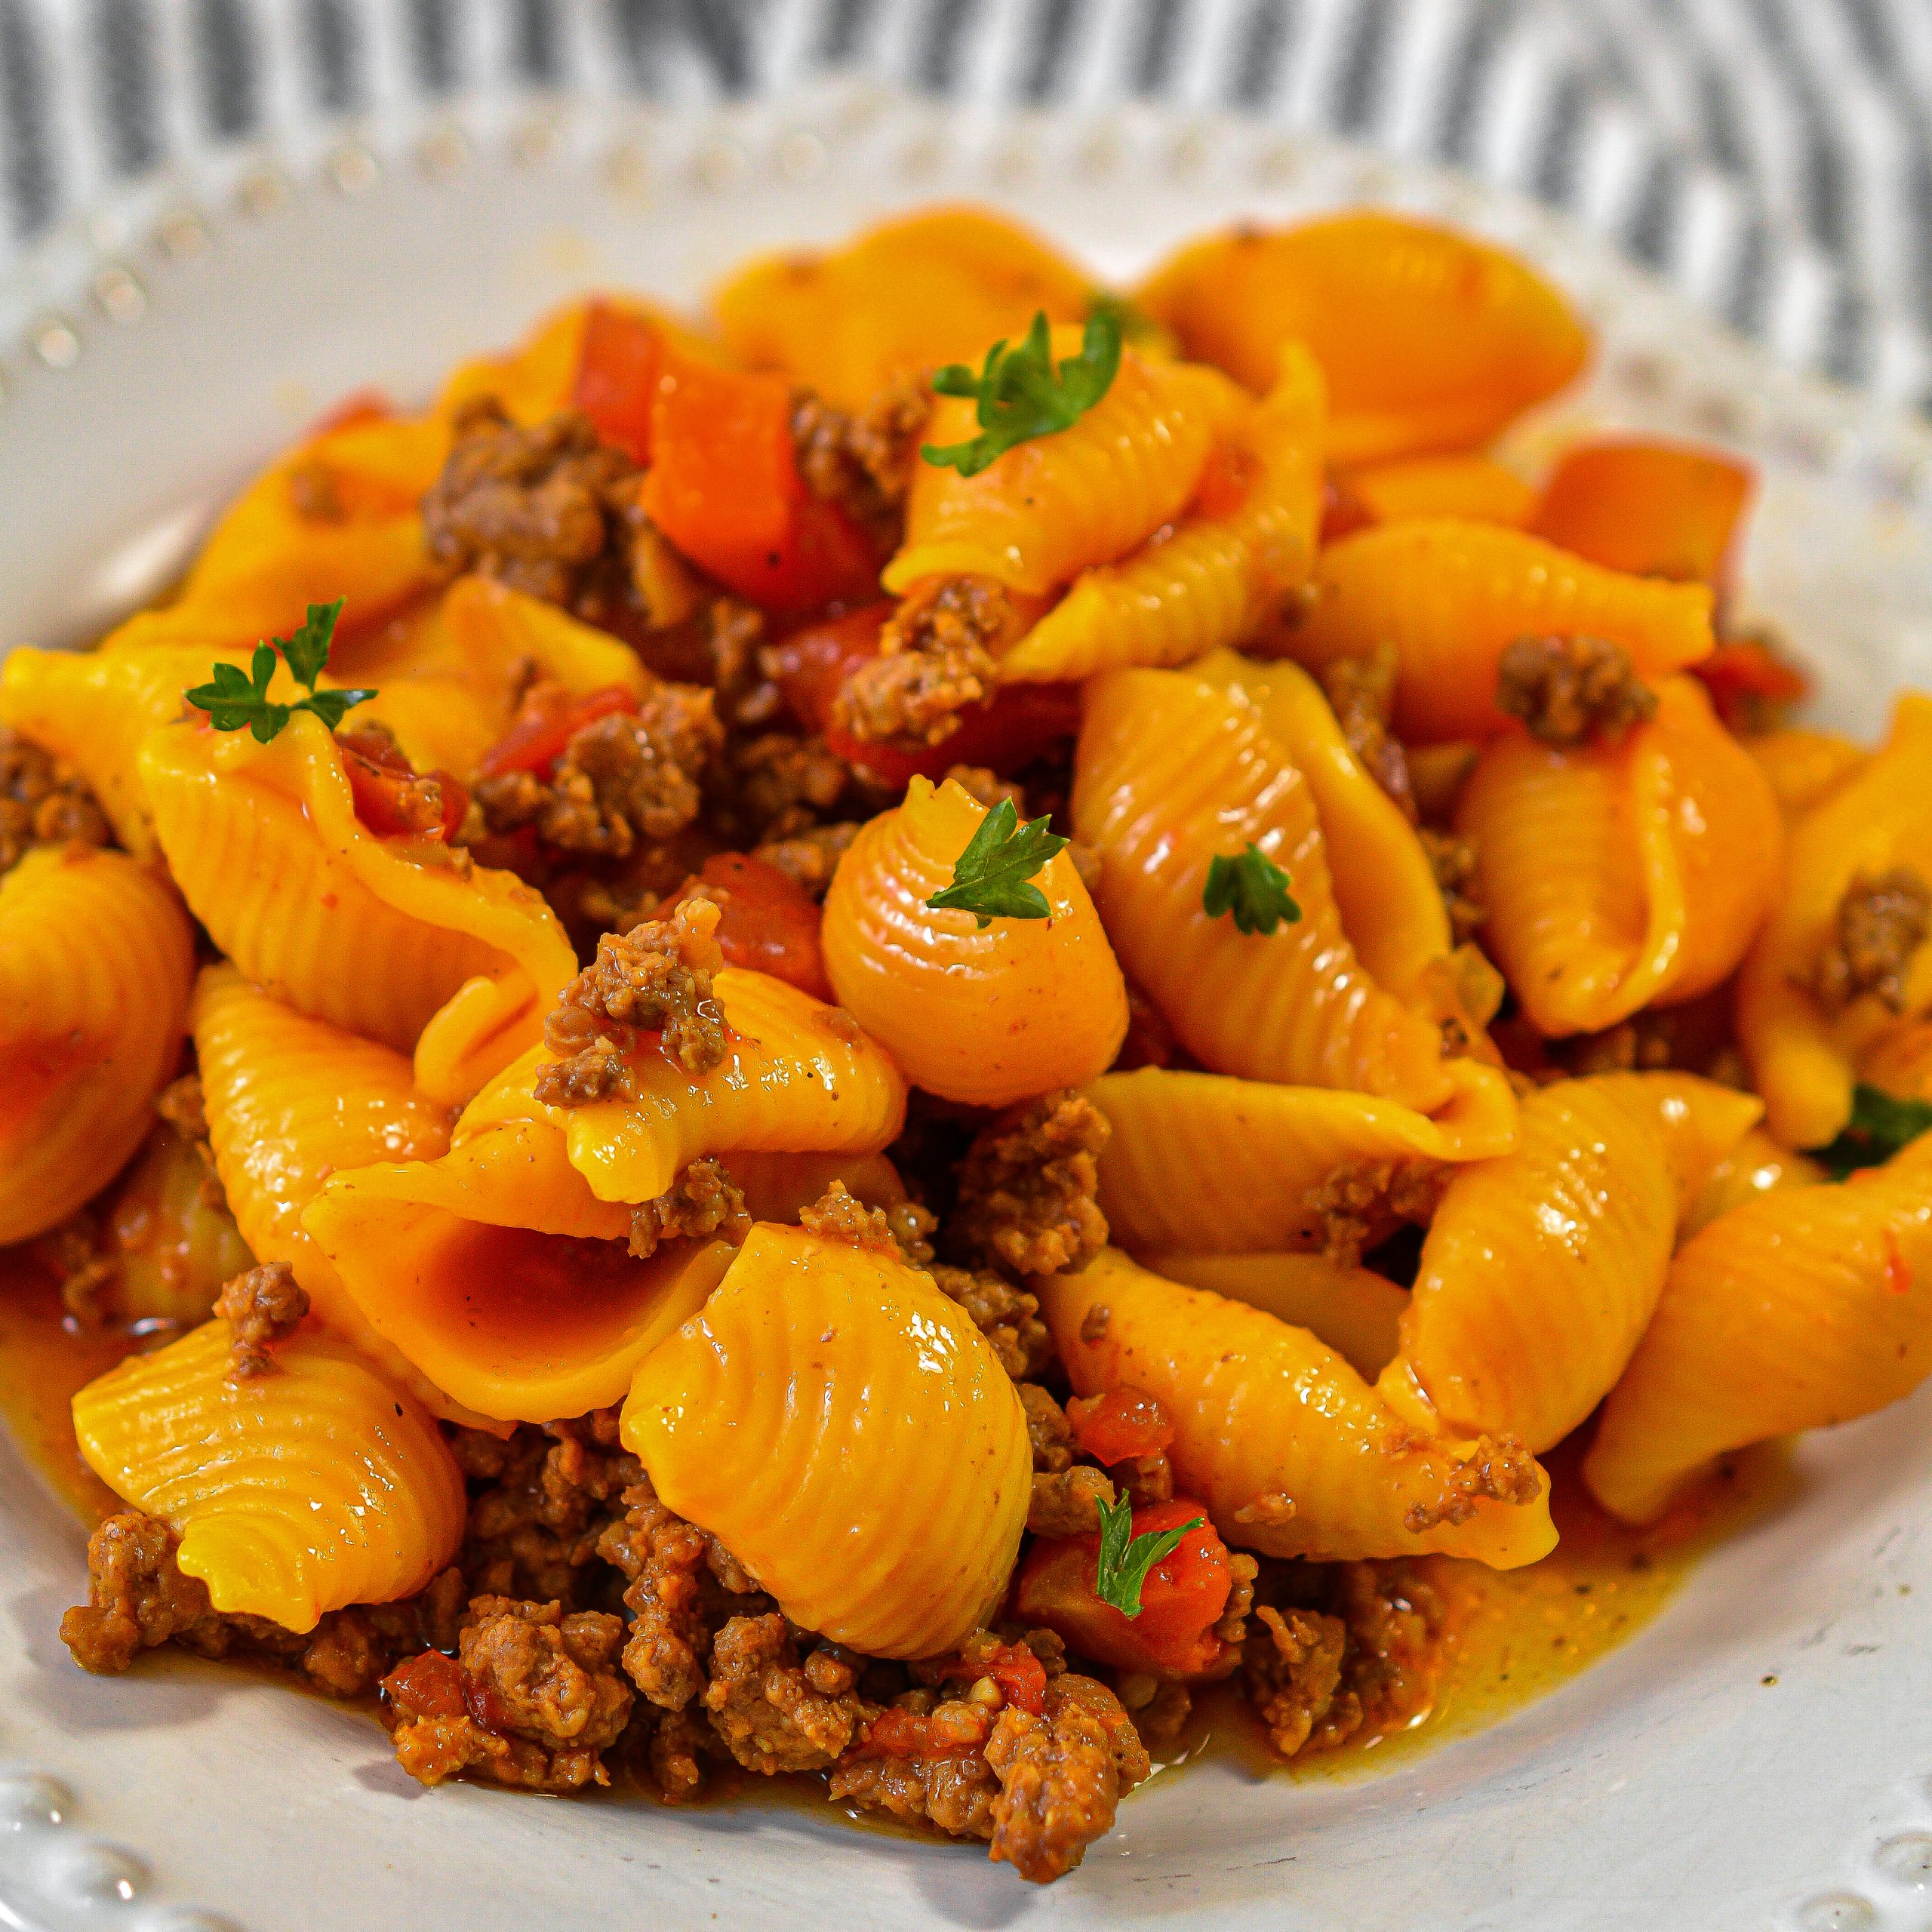 Pasta Shells with Ground Beef
